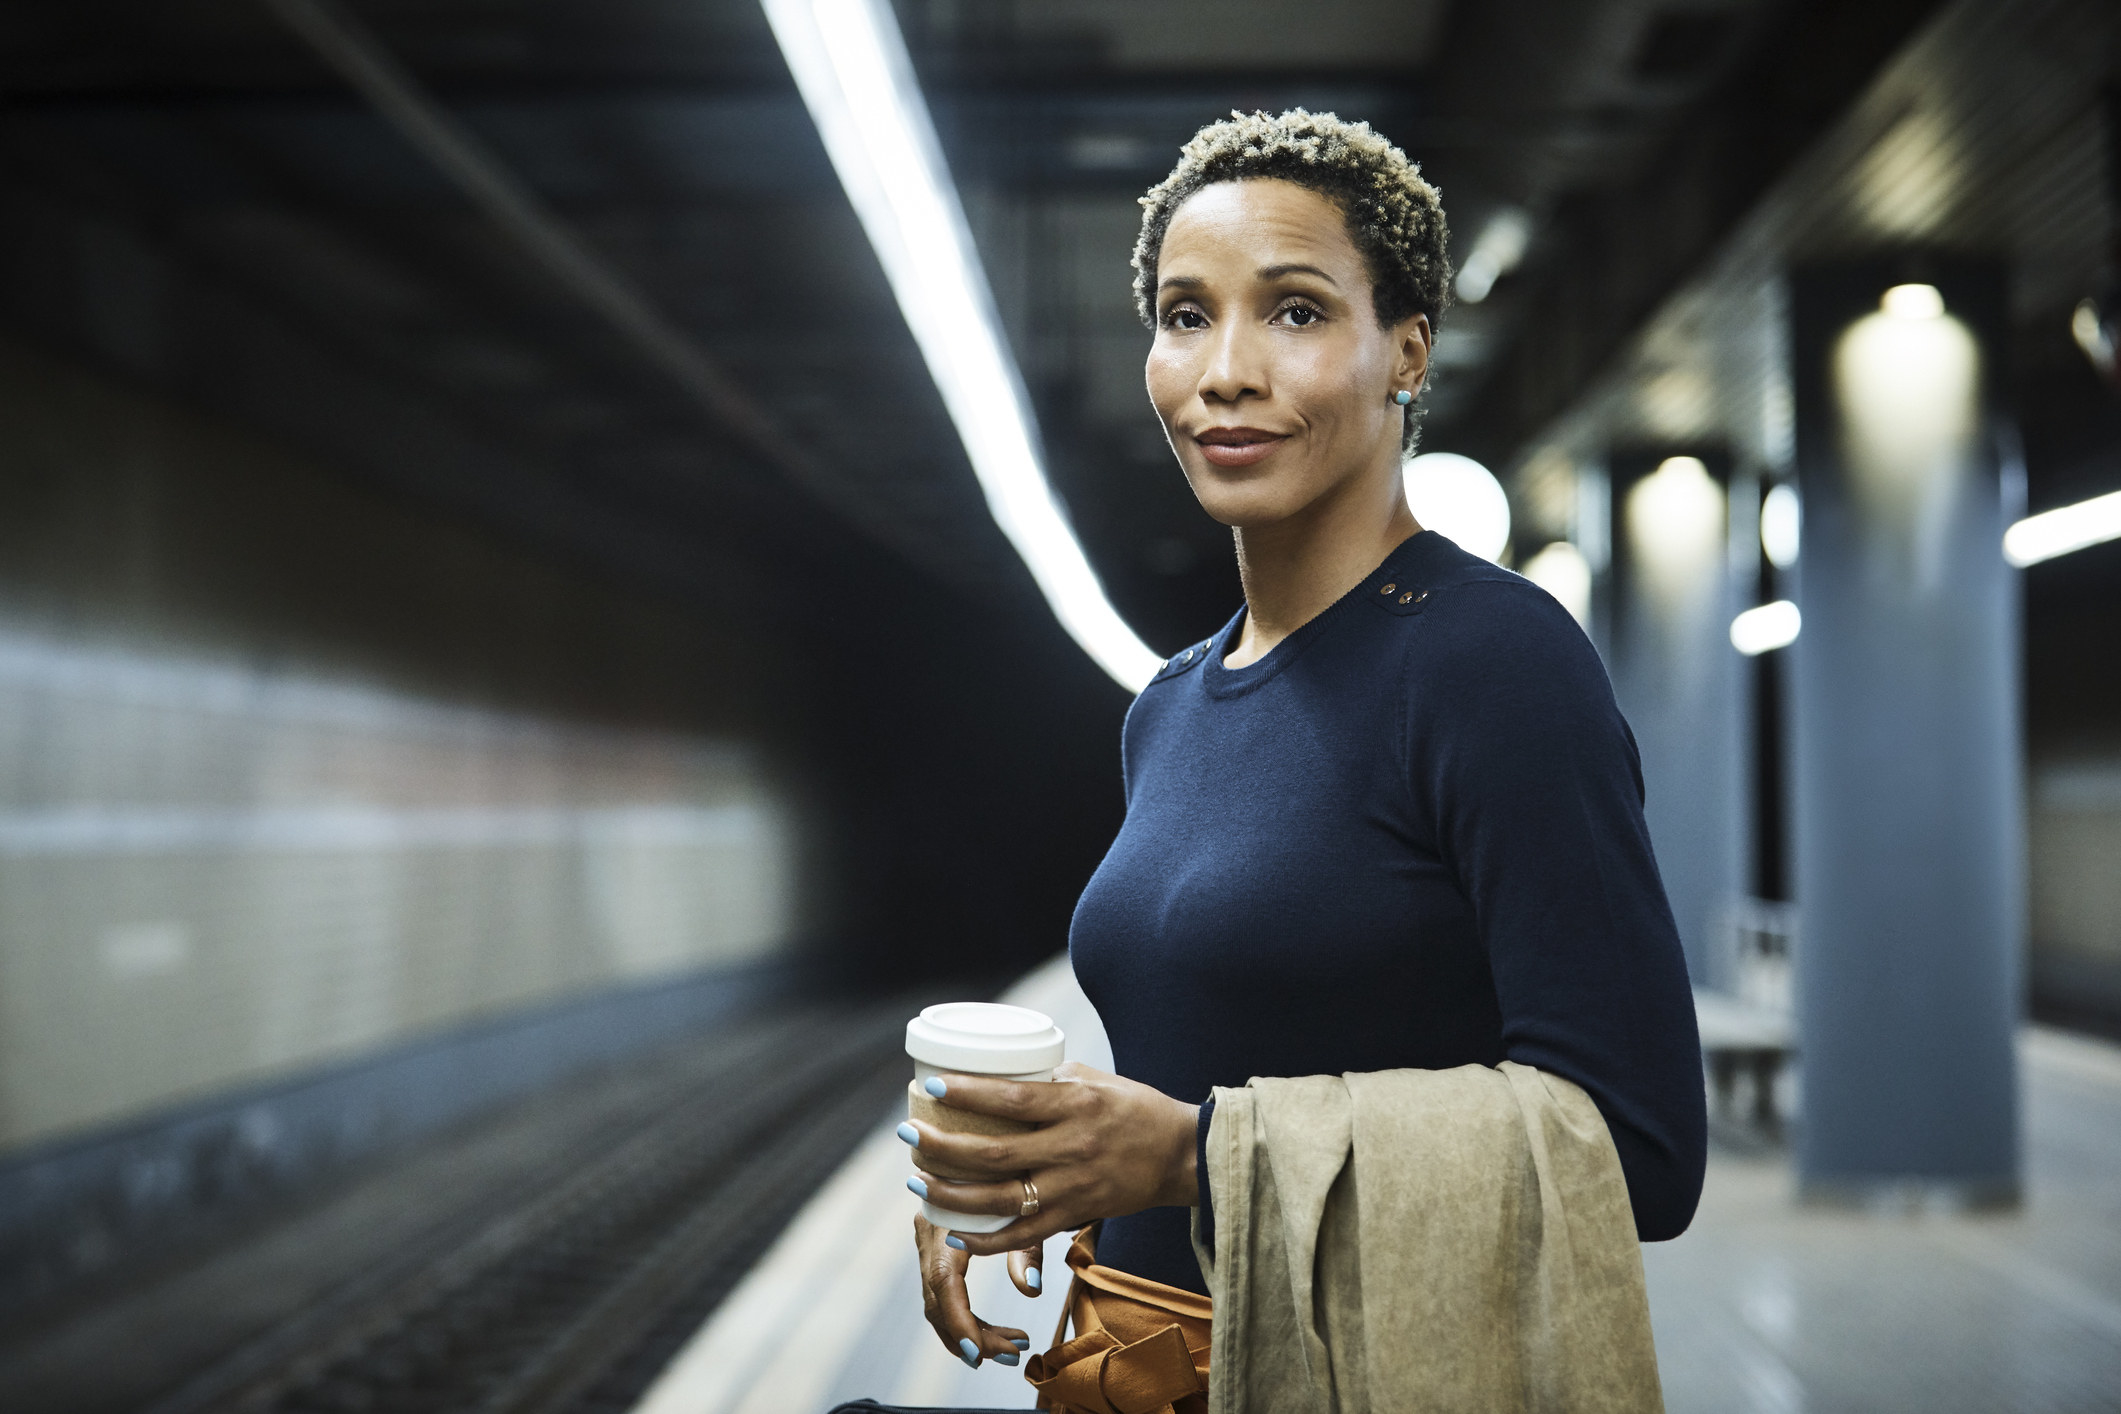 Businesswoman waiting for train at subway station